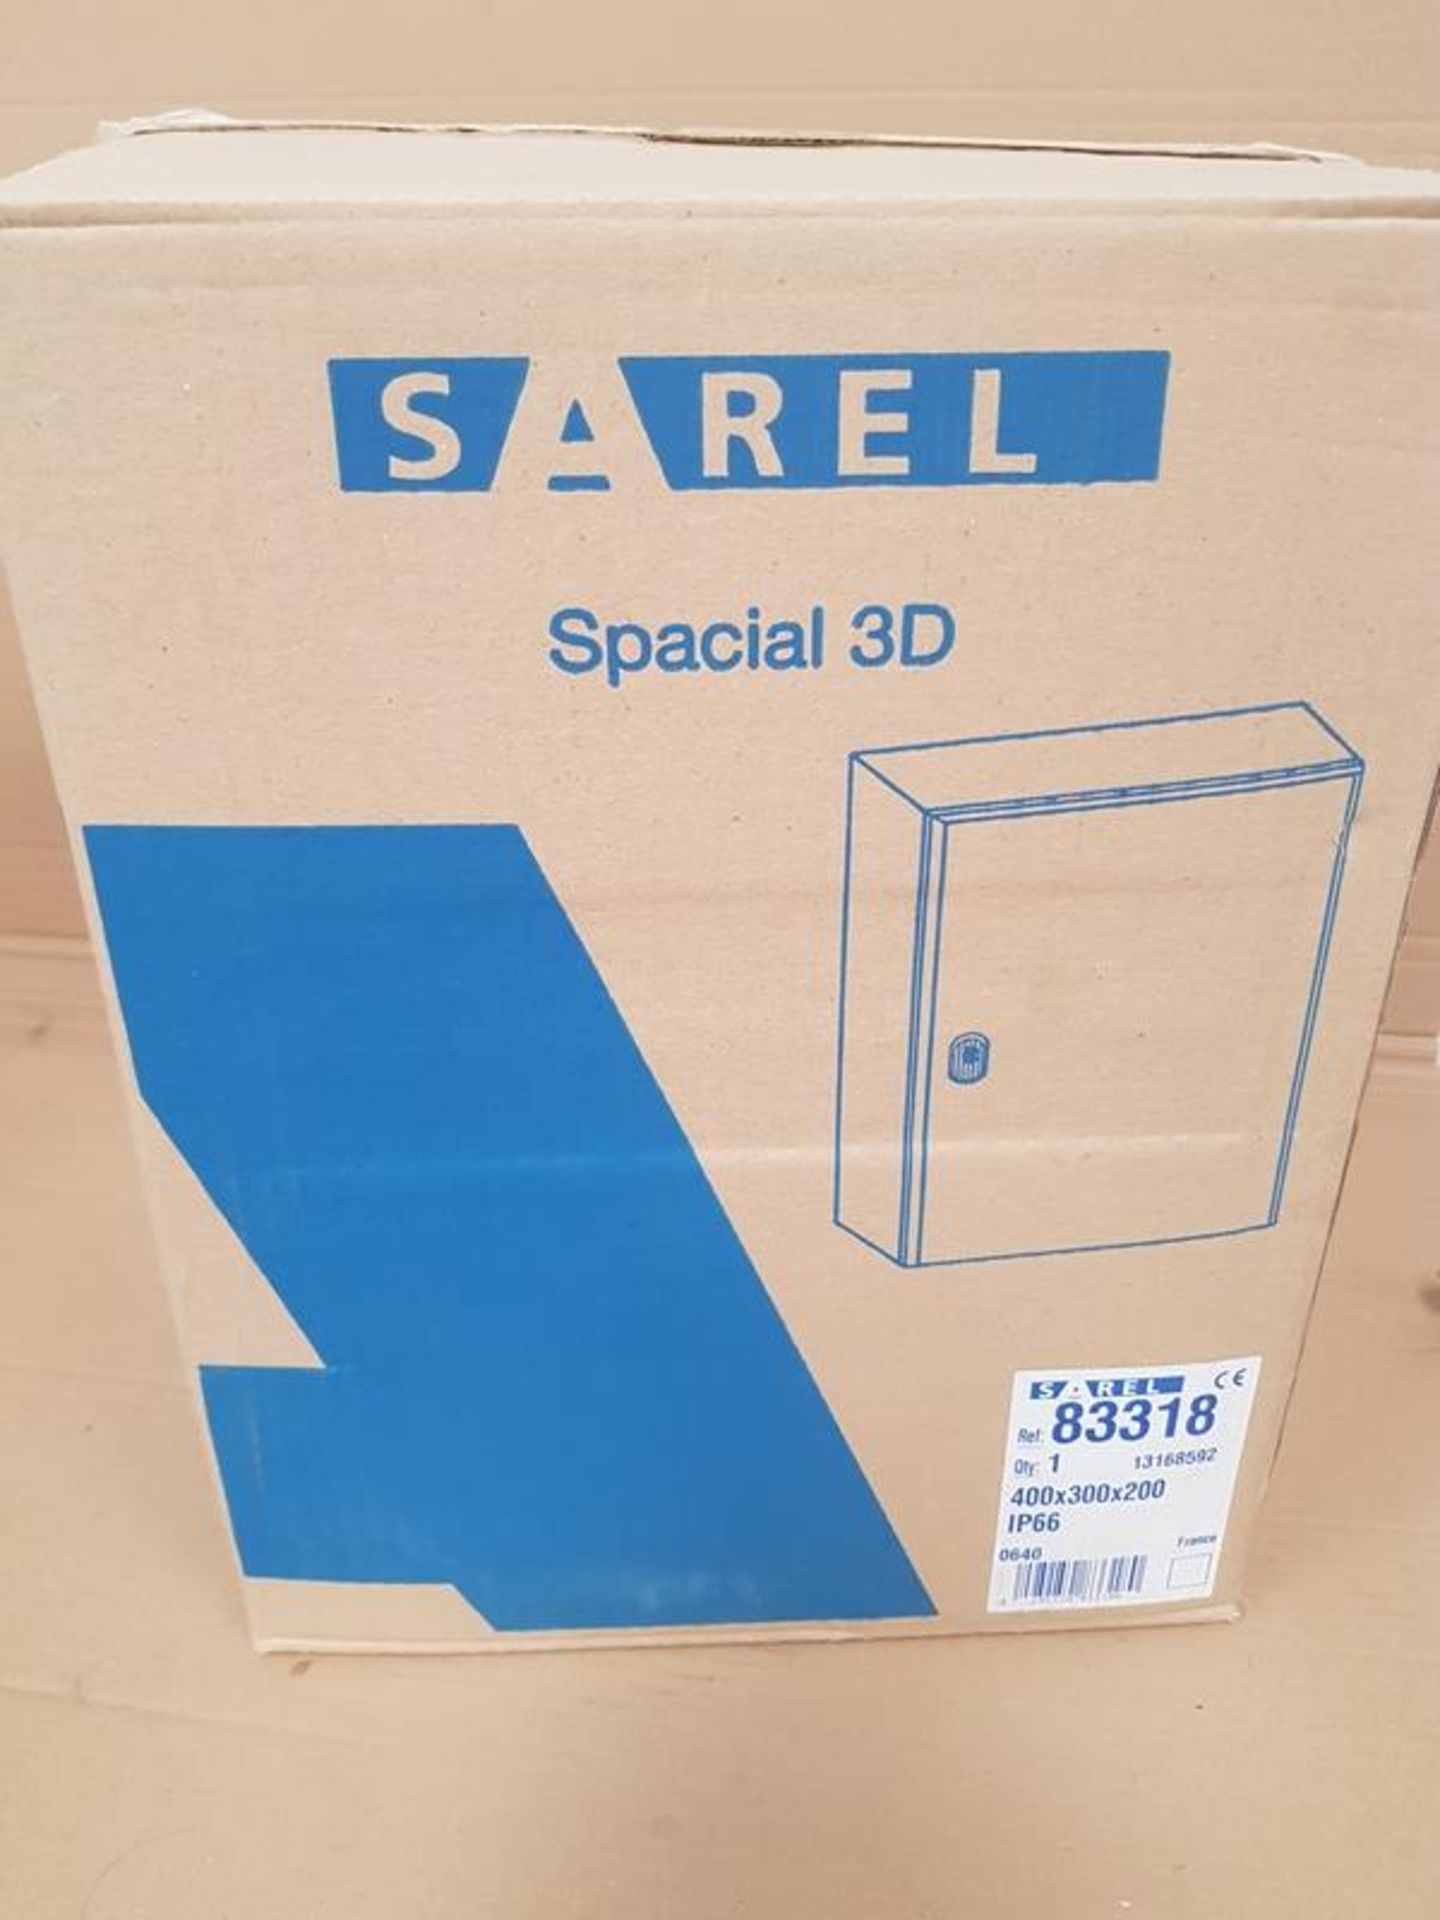 Sarel 83318 Electric cabinet, IP66, 400mm x 300mm x 200mm - Image 2 of 3